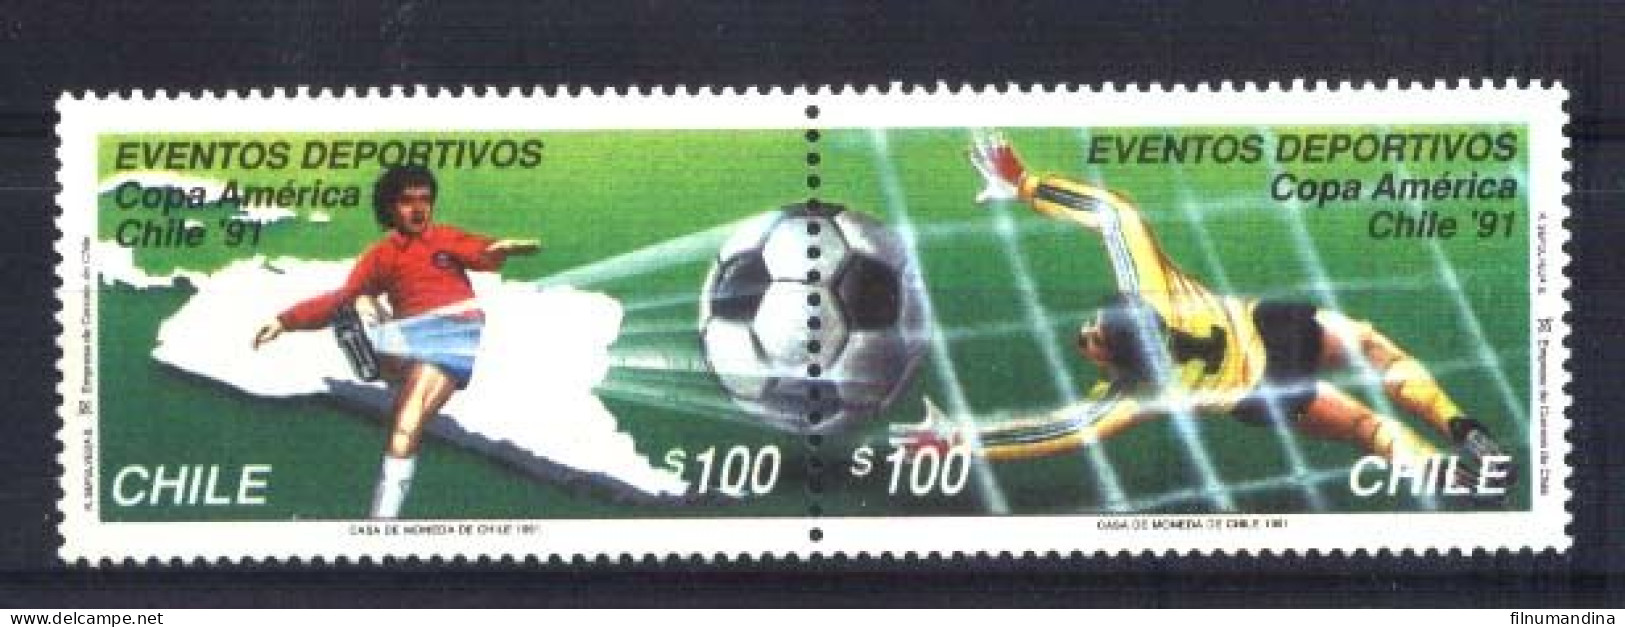 #2599 CHILE 1991 FOOTBALL FUTBOL SOCCER AMERICA CUP YV 1028-9 PAIR MNH - Chile